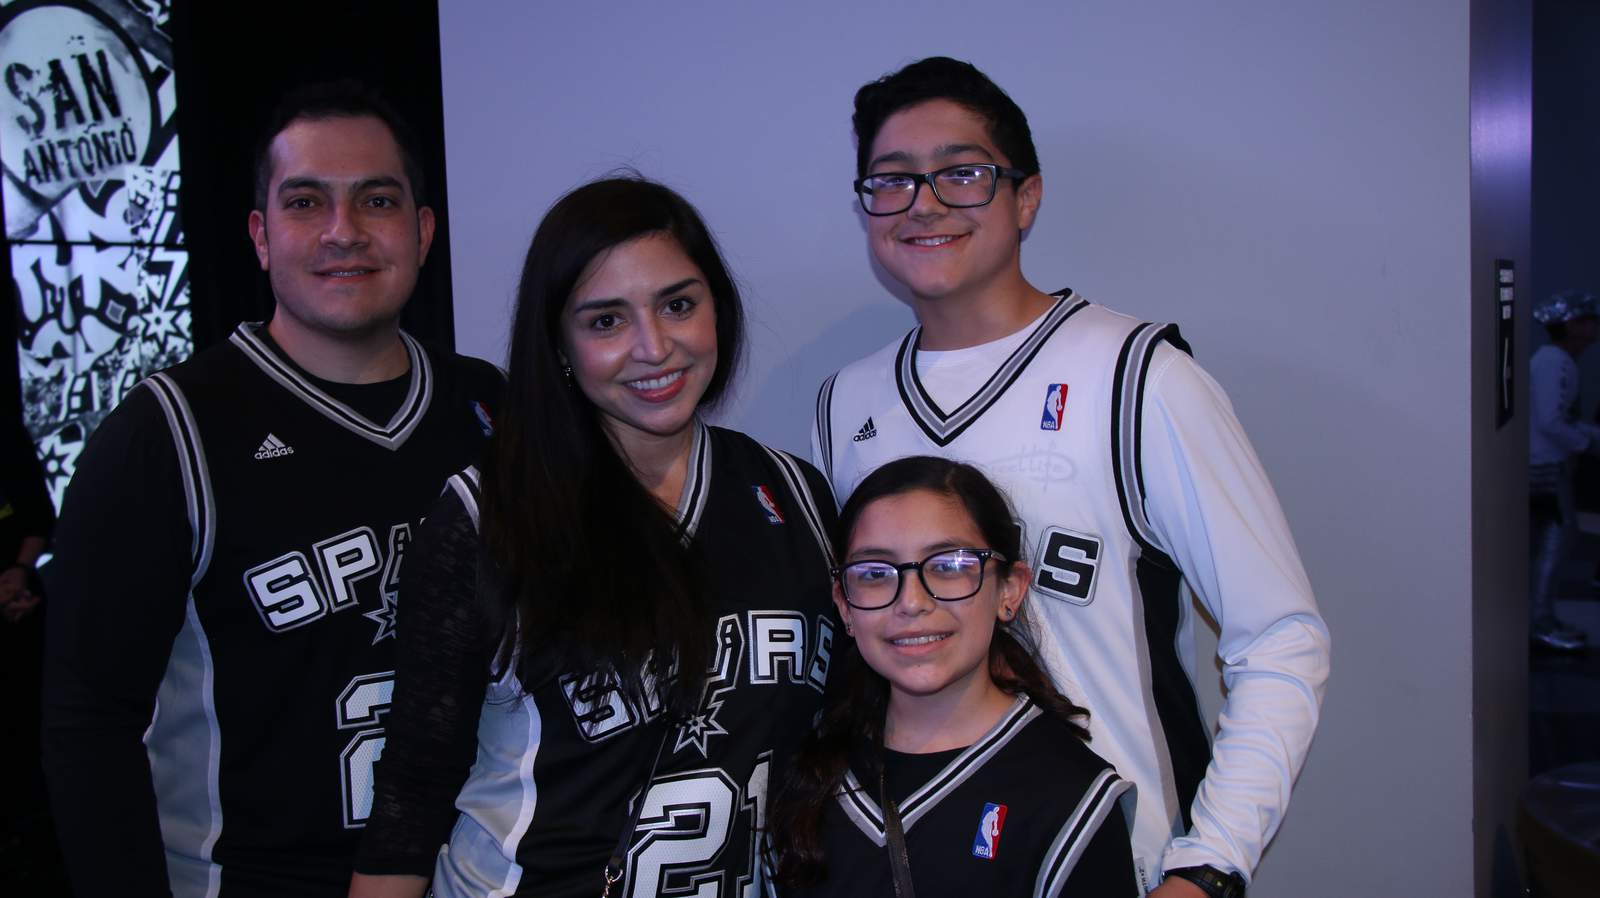 San Antonio Spurs’ ‘Welcome Home Game’ will include Ally Brooke, free shirts, gifts